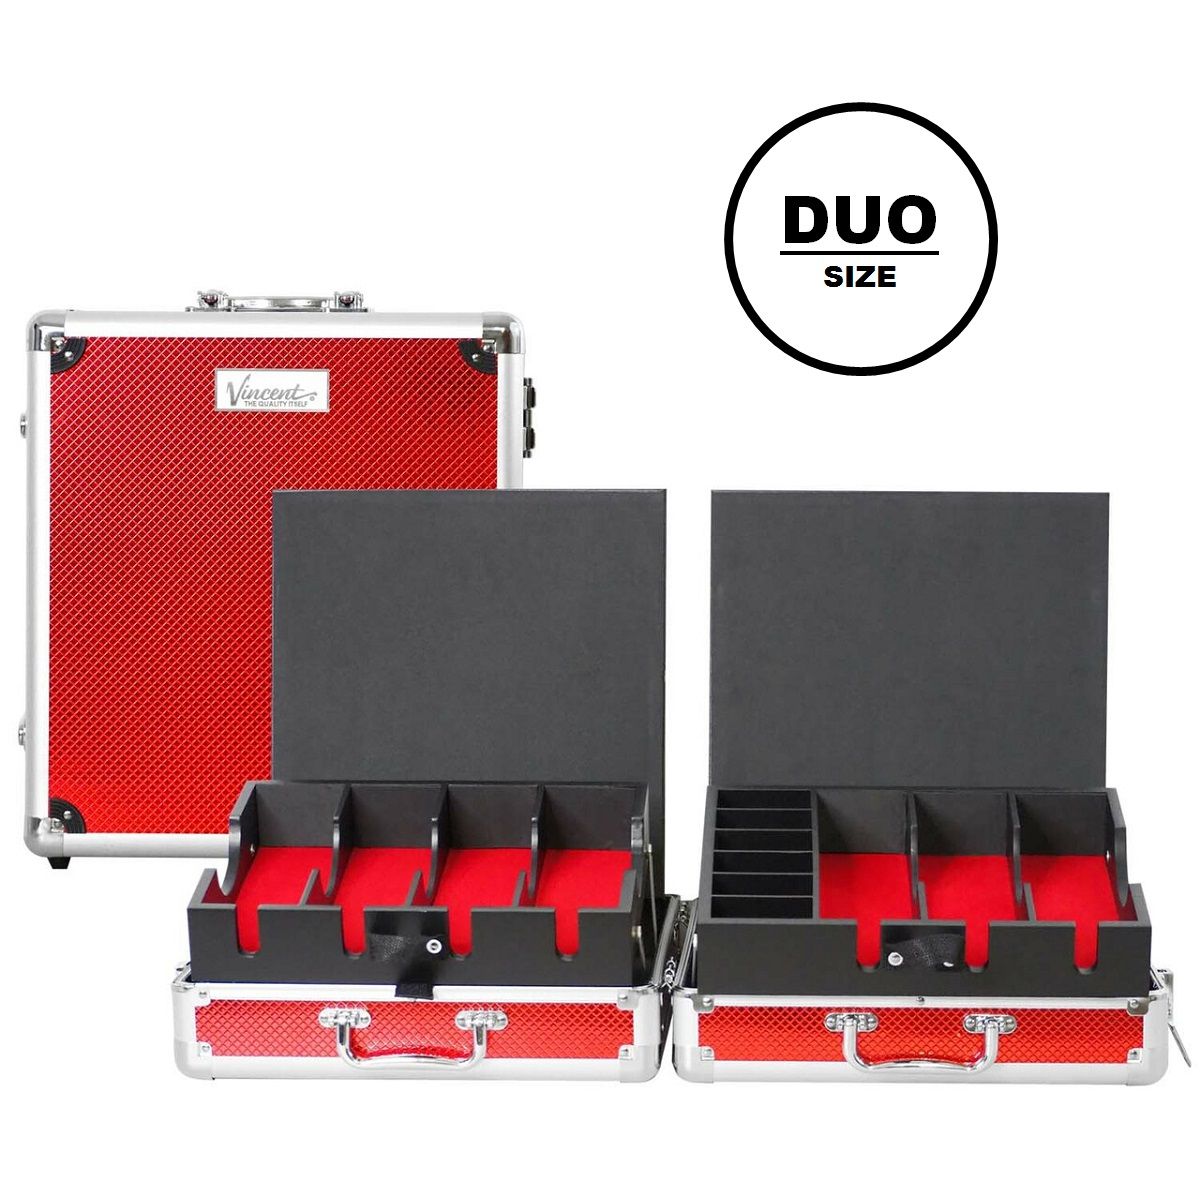 Vincent MasterCase – Duo (Red) #VT10148-RD 1